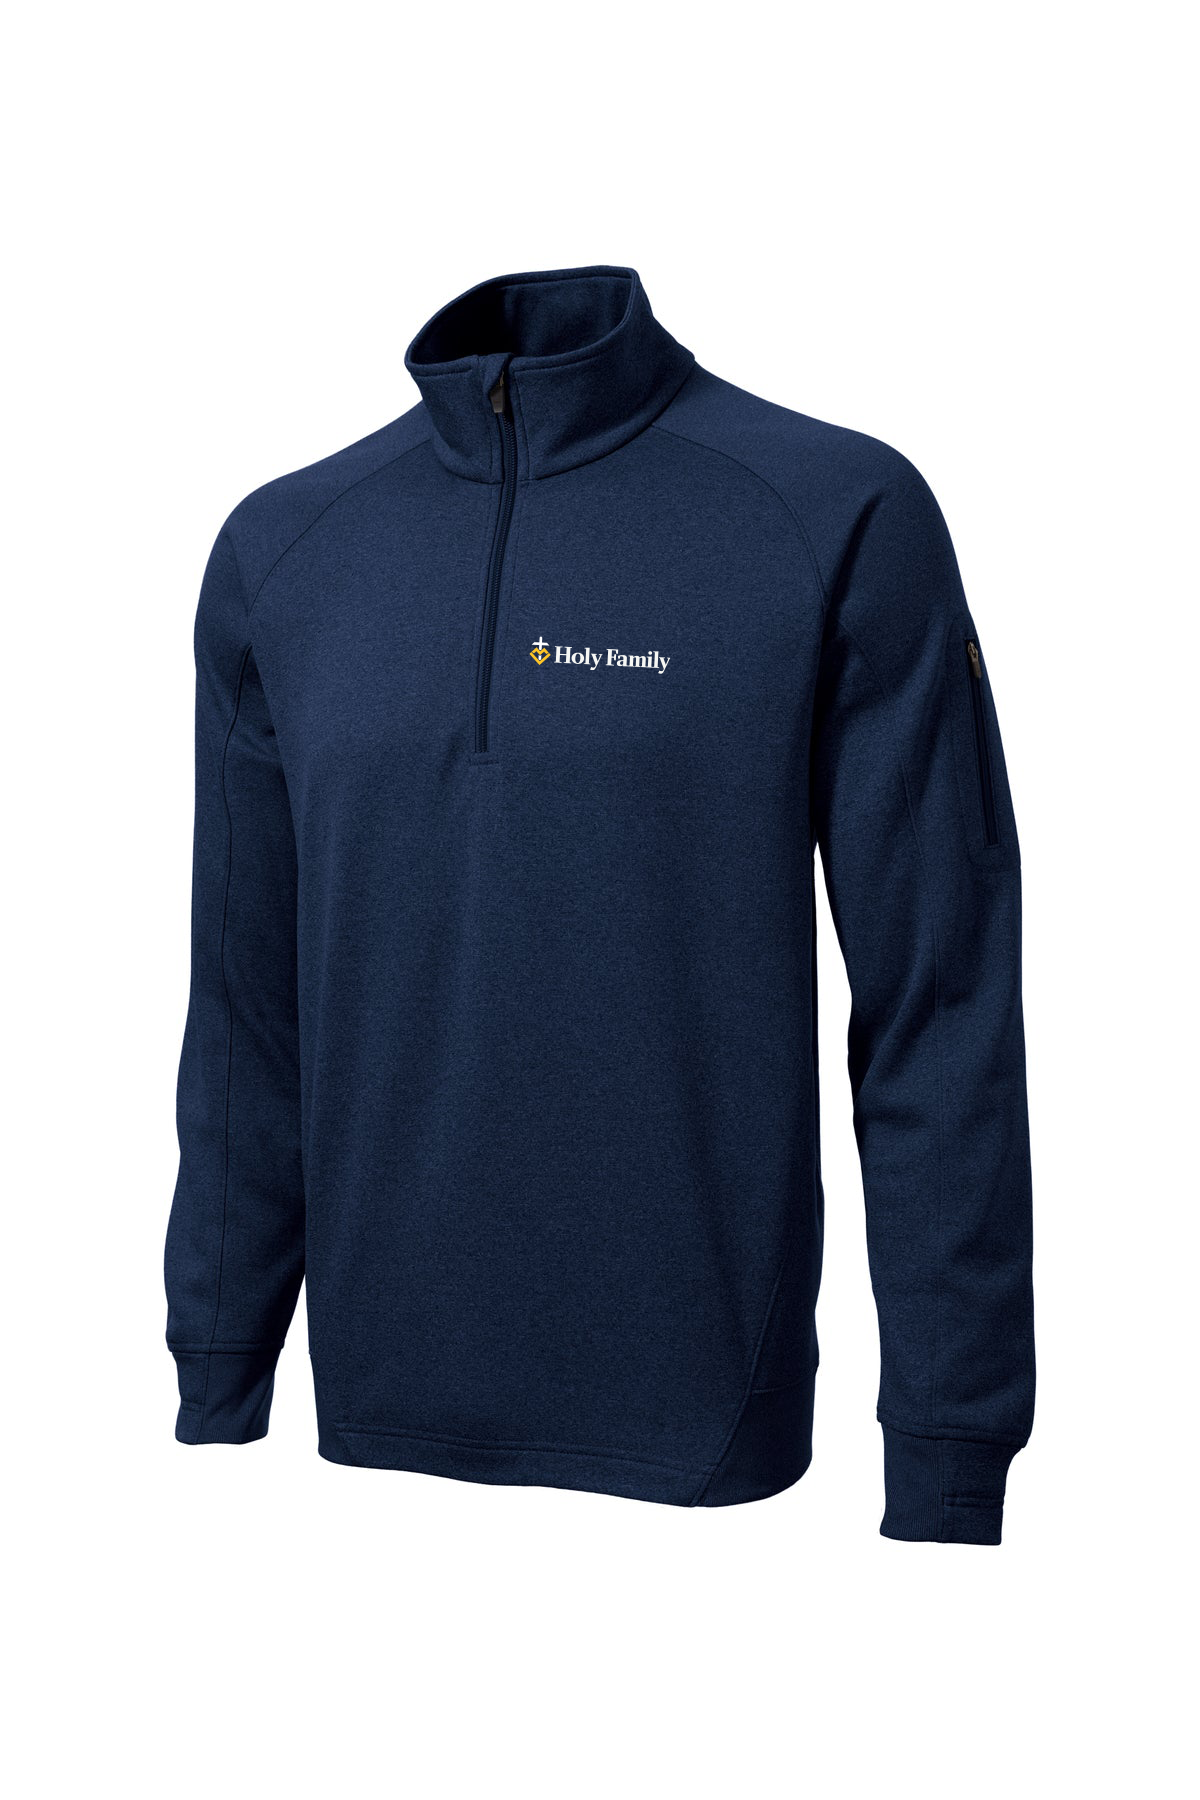 F247 - HOLY FAMILY - Adult Tech Fleece Pullover